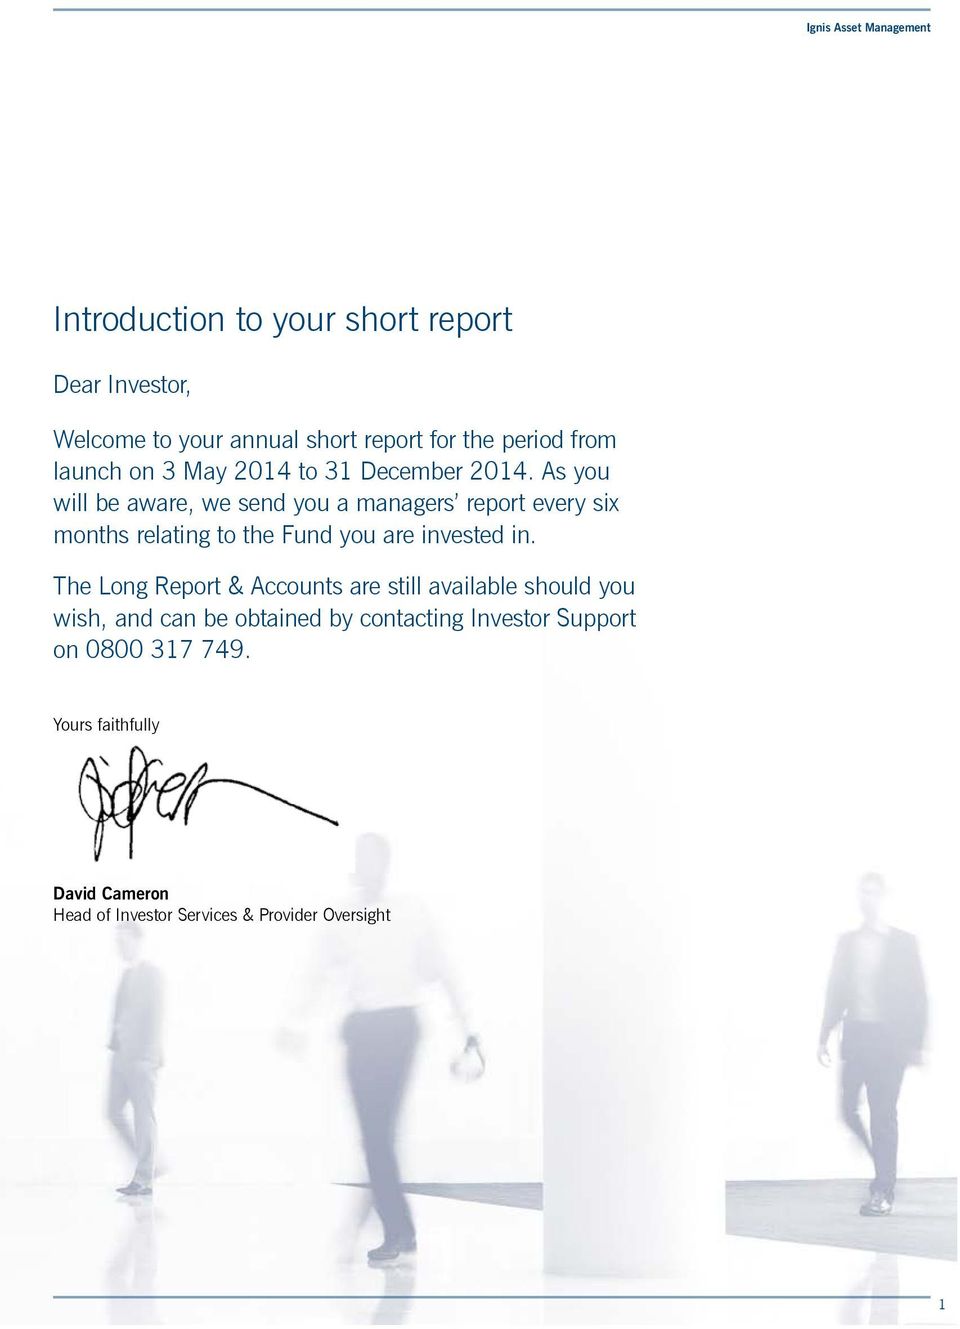 As you will be aware, we send you a managers report every six months relating to the Fund you are invested in.